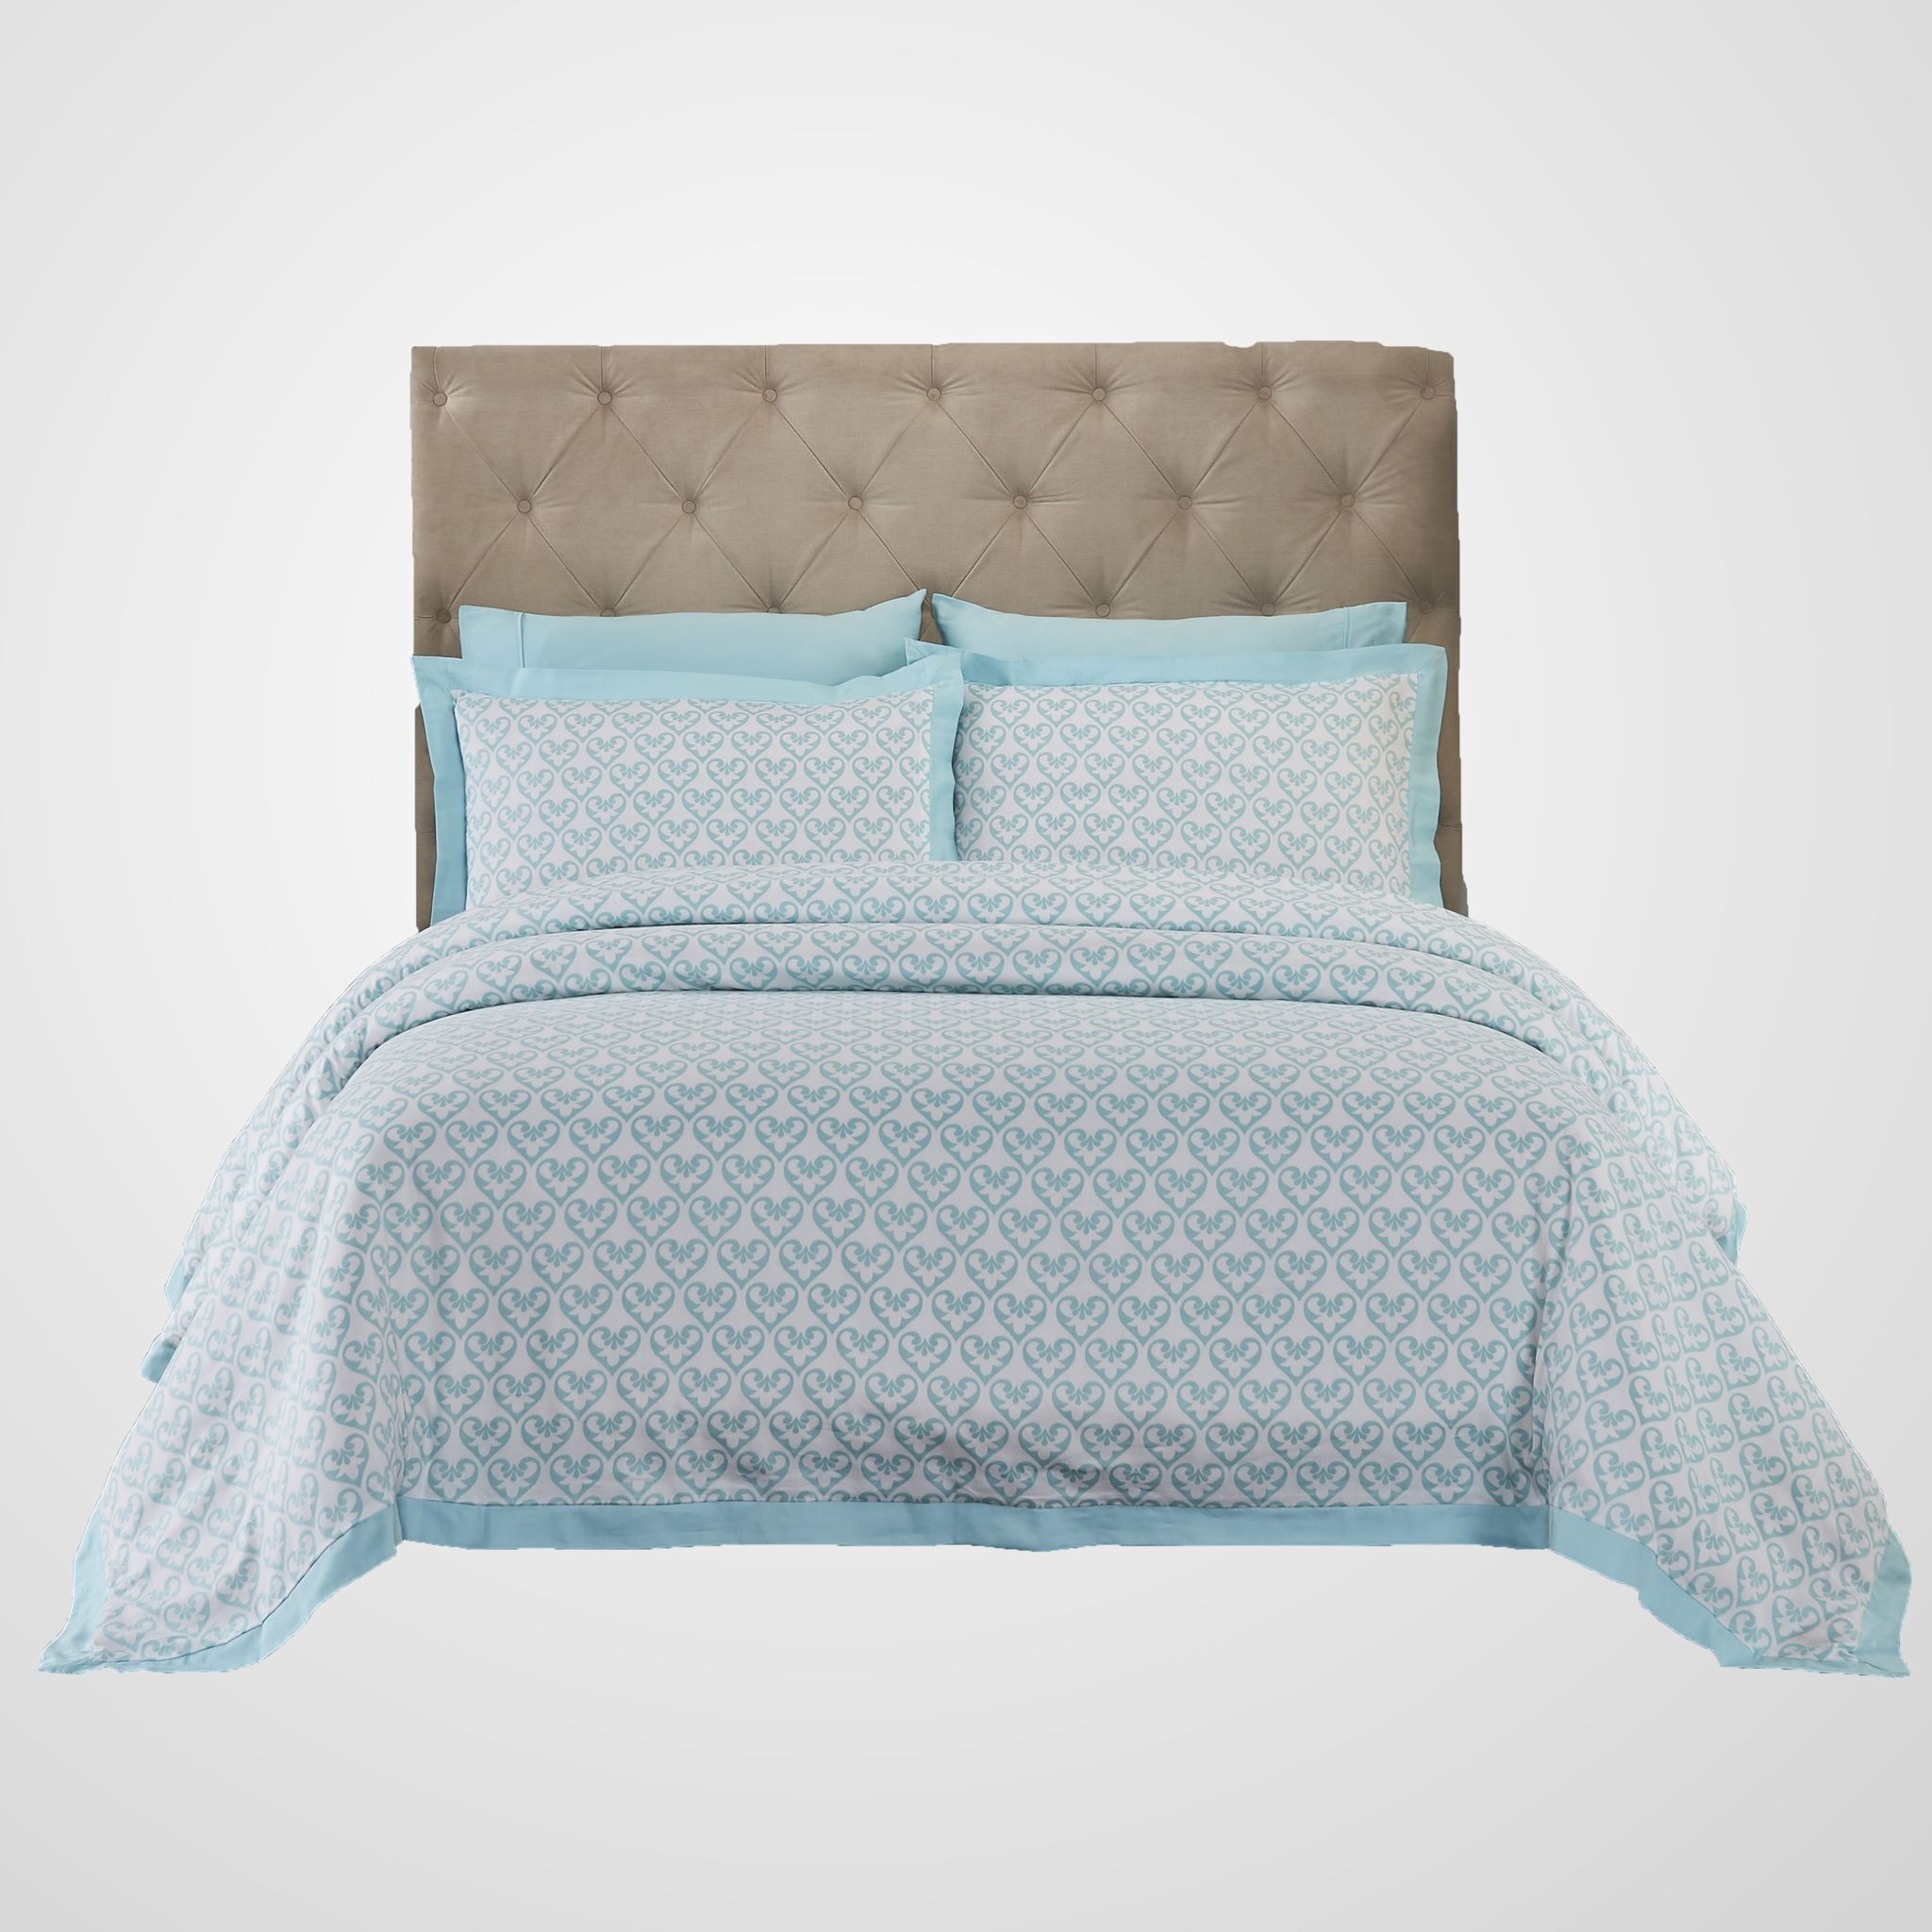 Cotton Comforter Set 7-Piece  Double Size All Season Bedding Set  With Duvet Set Cover Pillow Sham And Pillow Cases, Teal